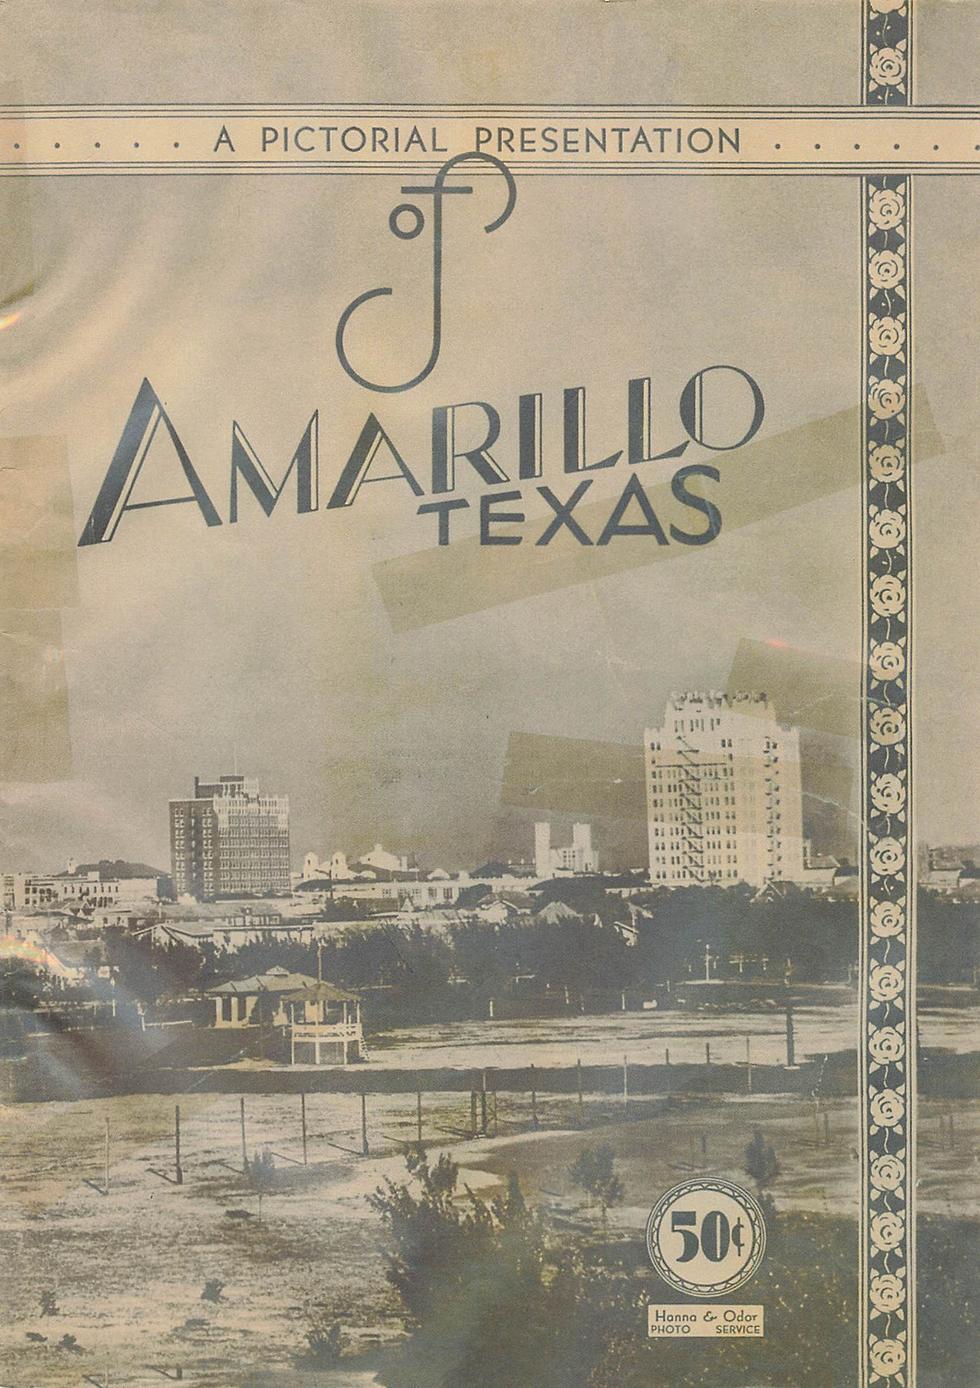 So This Is What Life In Amarillo Really Looked Like In The 60s